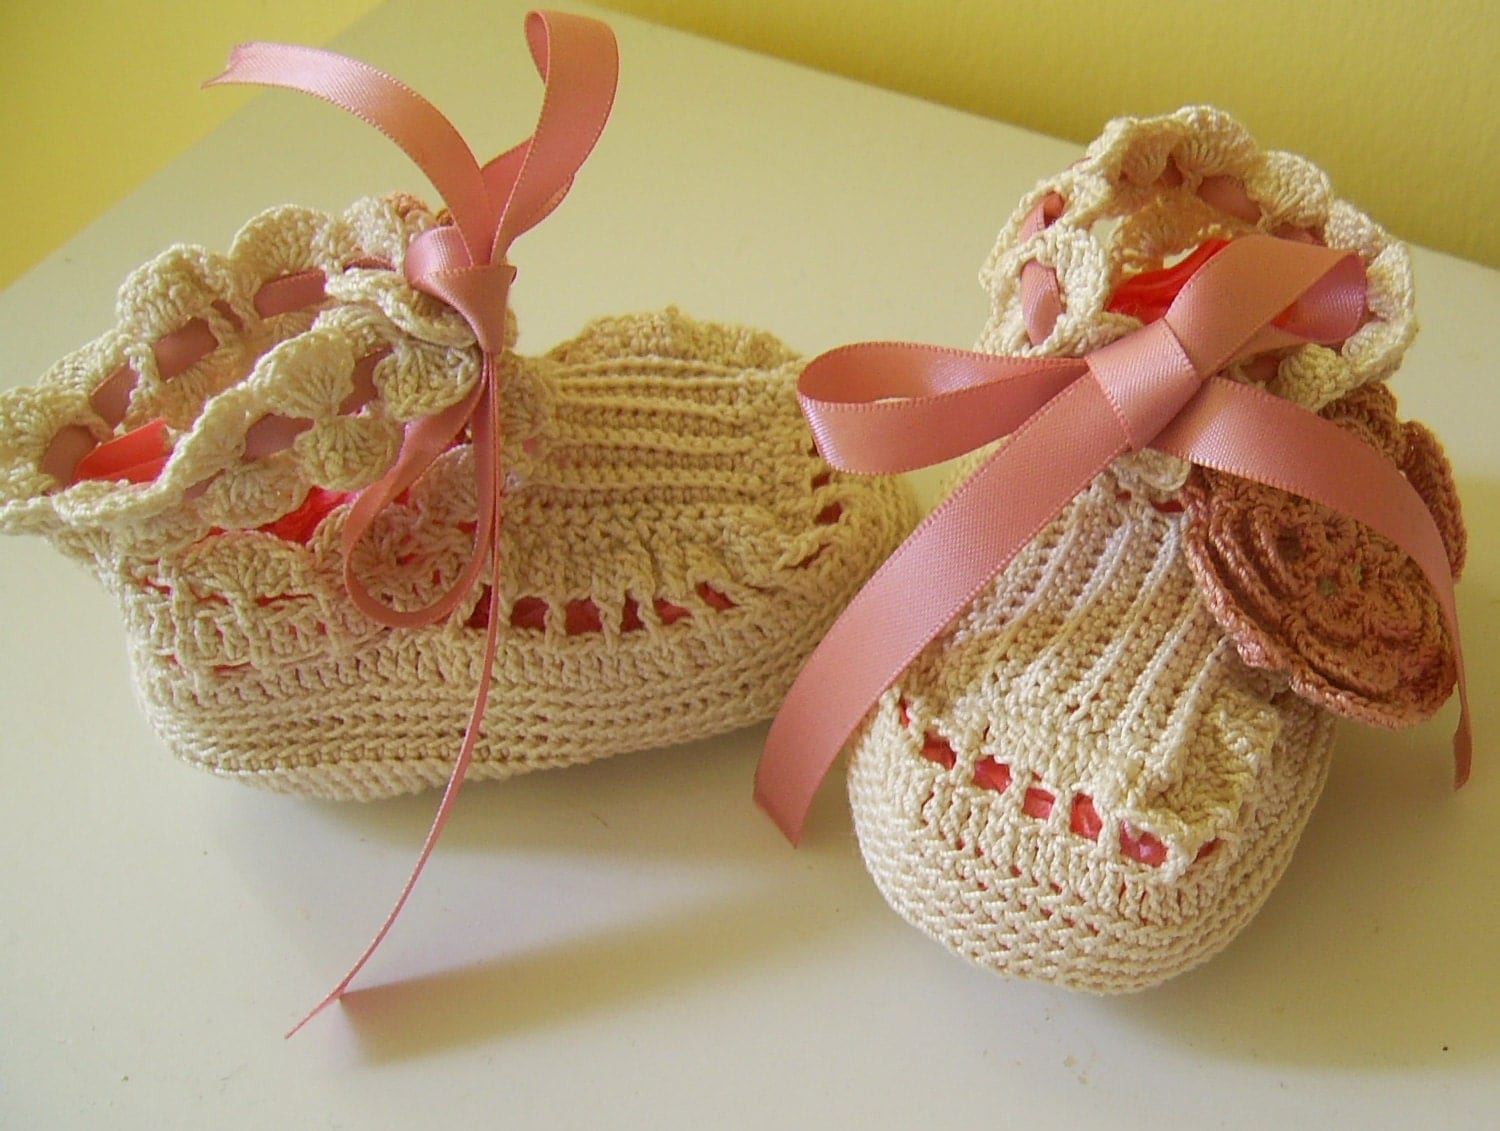 Vintage Style Irish Crocheted baby Shoes by PinkPicot on Etsy